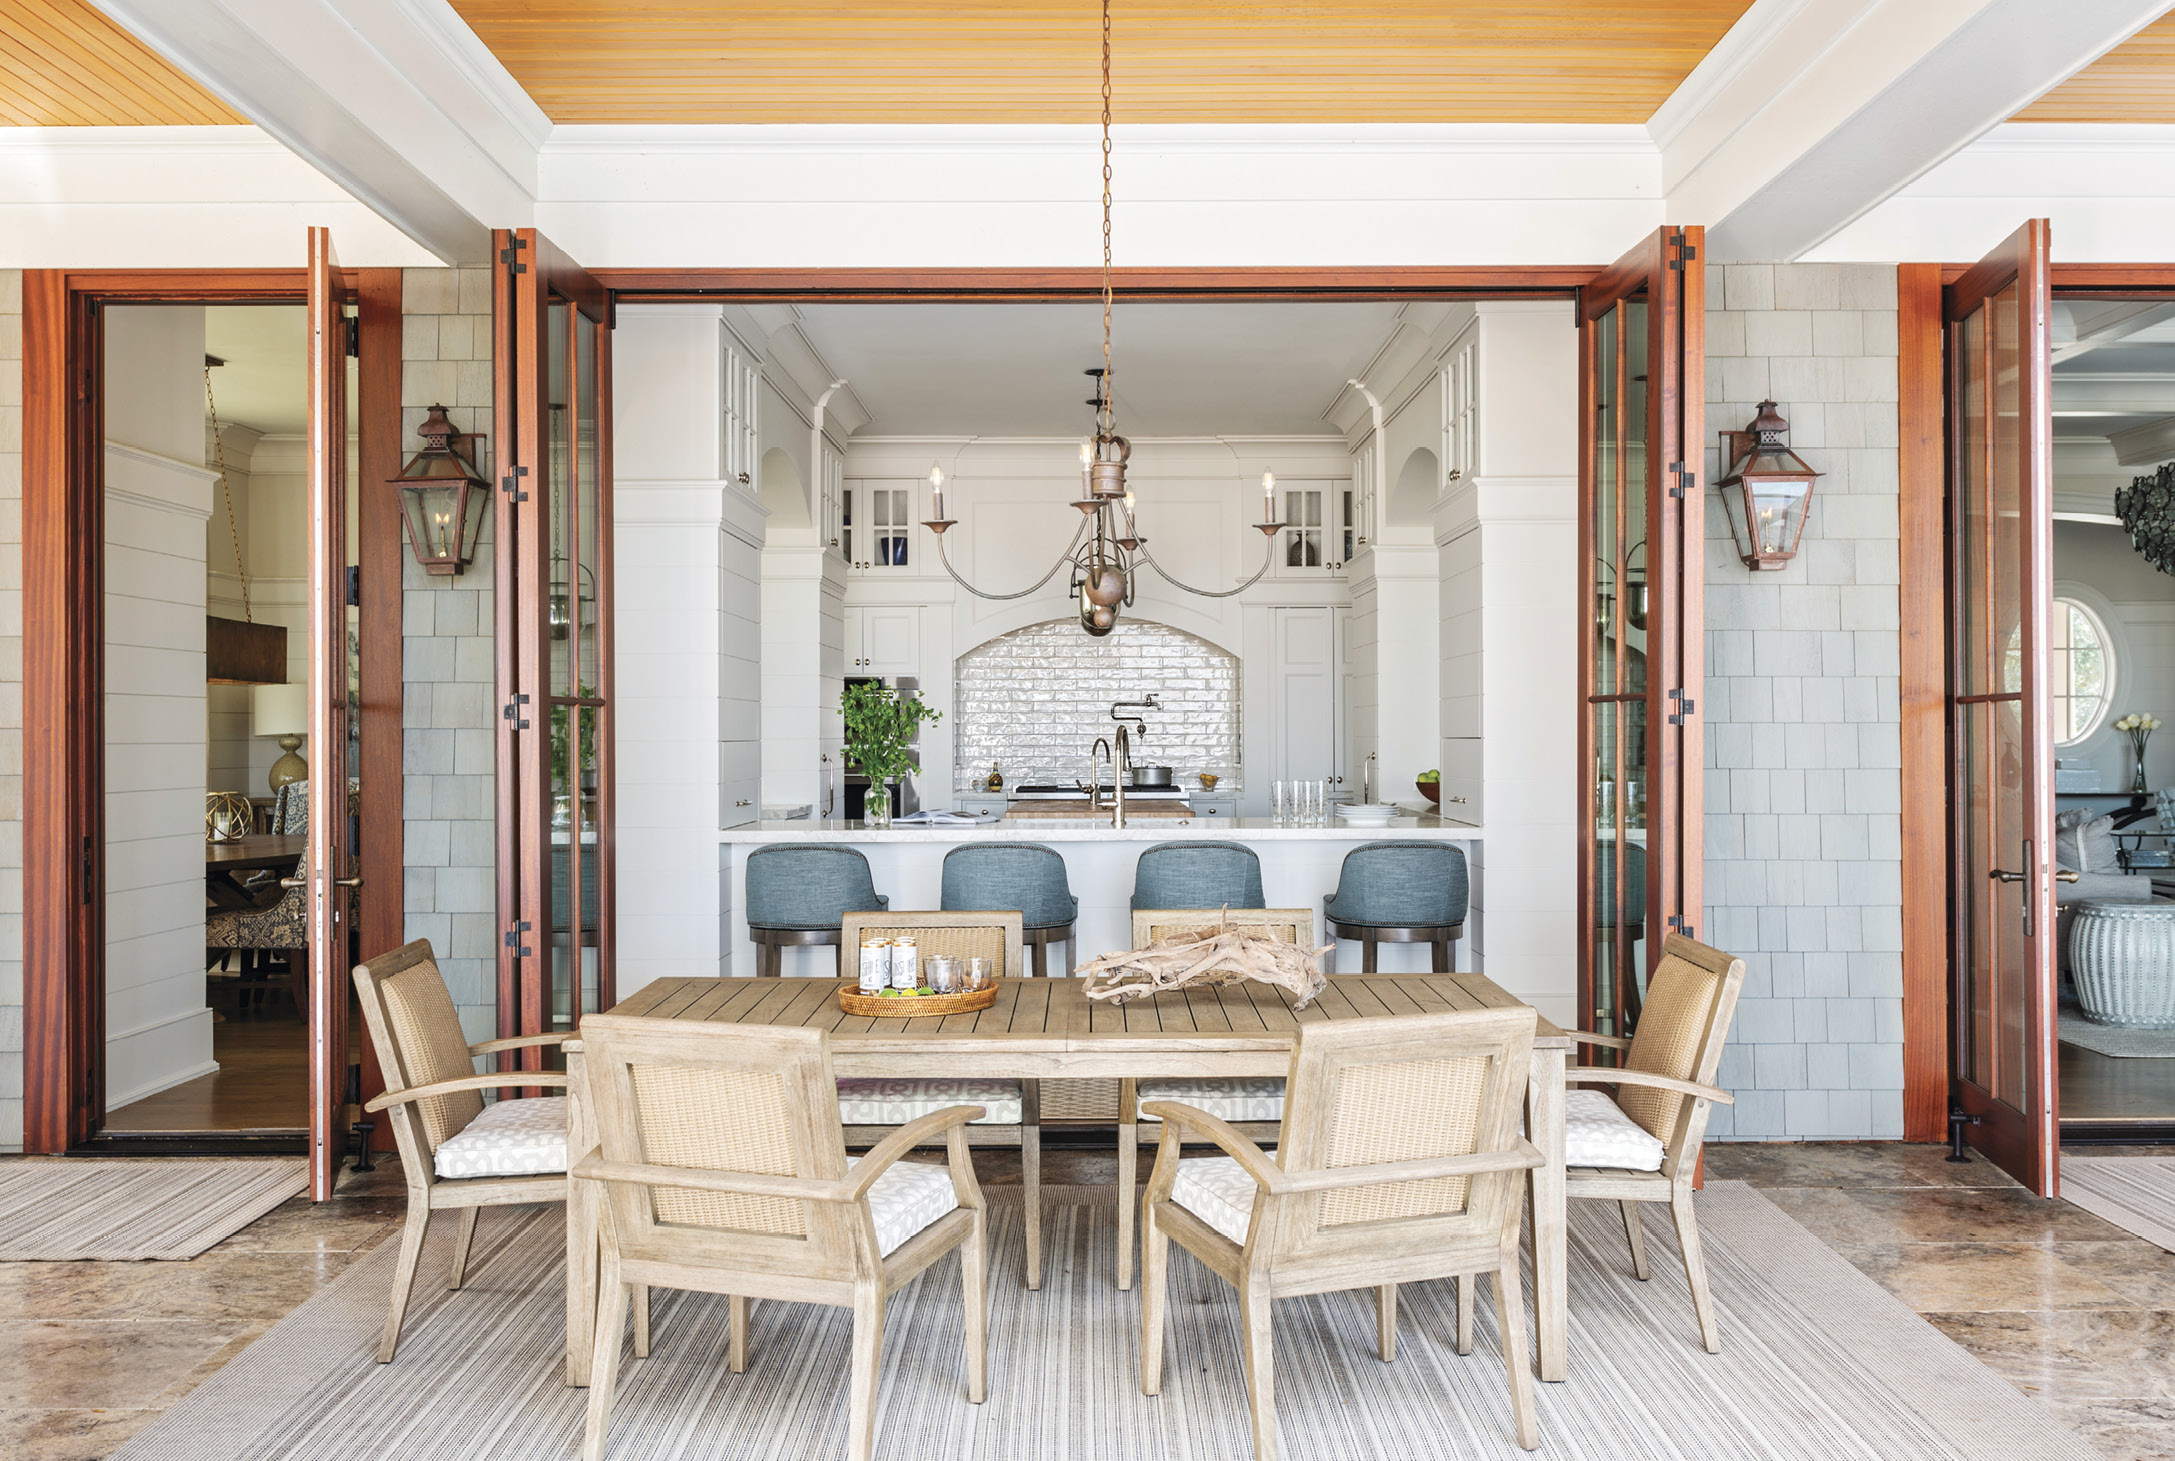 EATING IN &amp; OUT: A floating kitchen anchors the home, tying the indoor and outdoor living spaces together. The alfresco Lloyd Flanders dining table and chairs, purchased at GDC Home, is as accessible to the chef as the formal dining room.